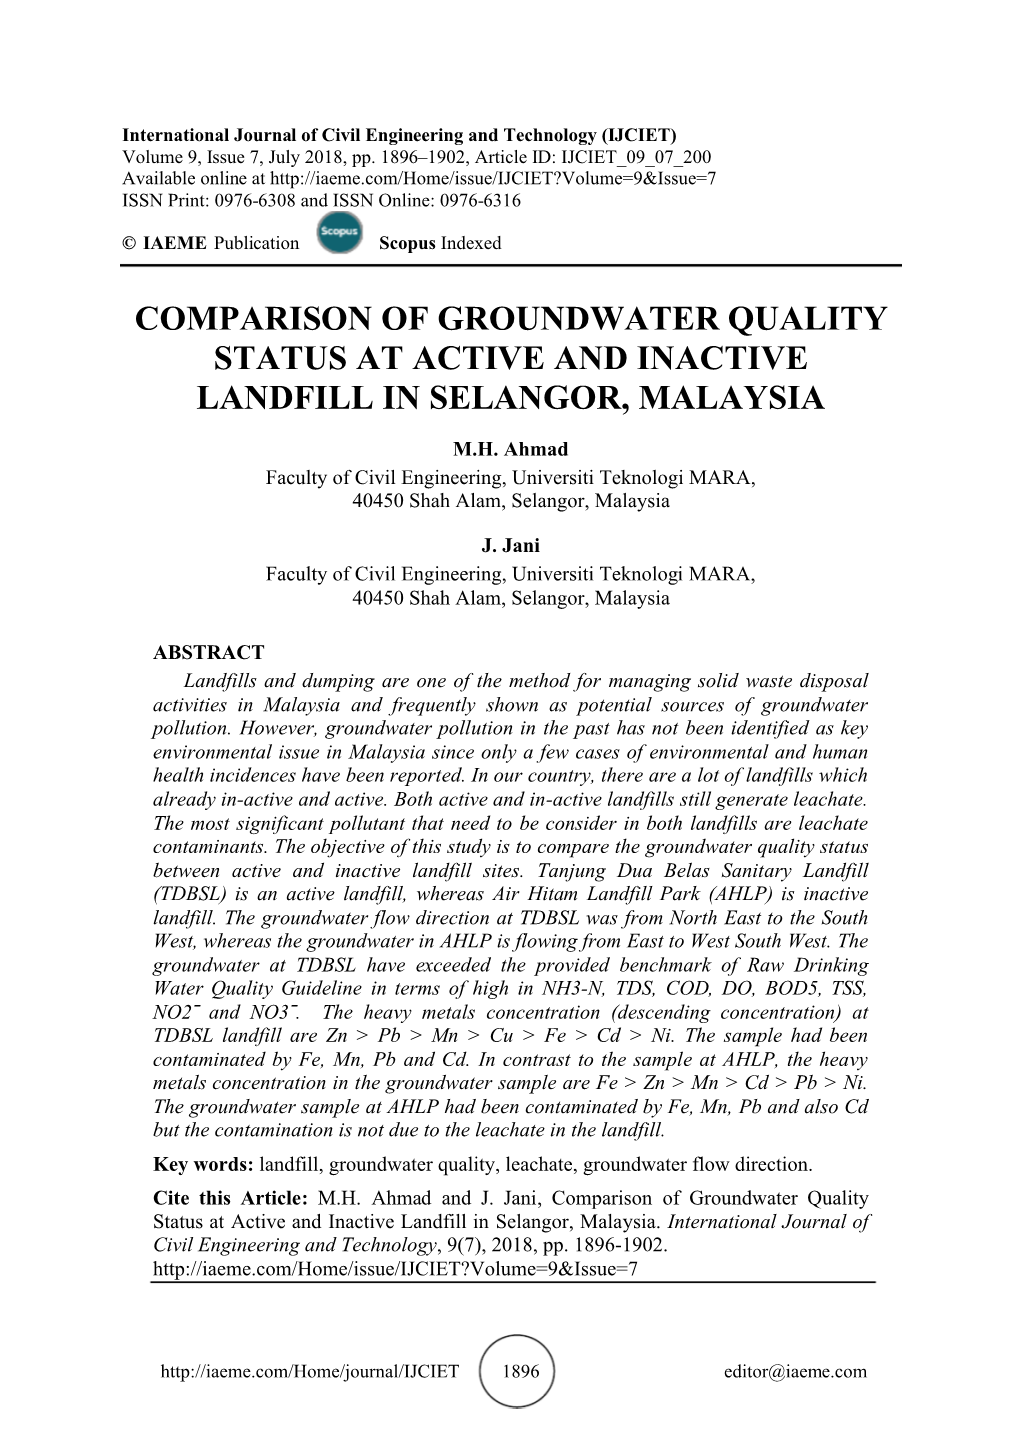 Comparison of Groundwater Quality Status at Active and Inactive Landfill in Selangor, Malaysia